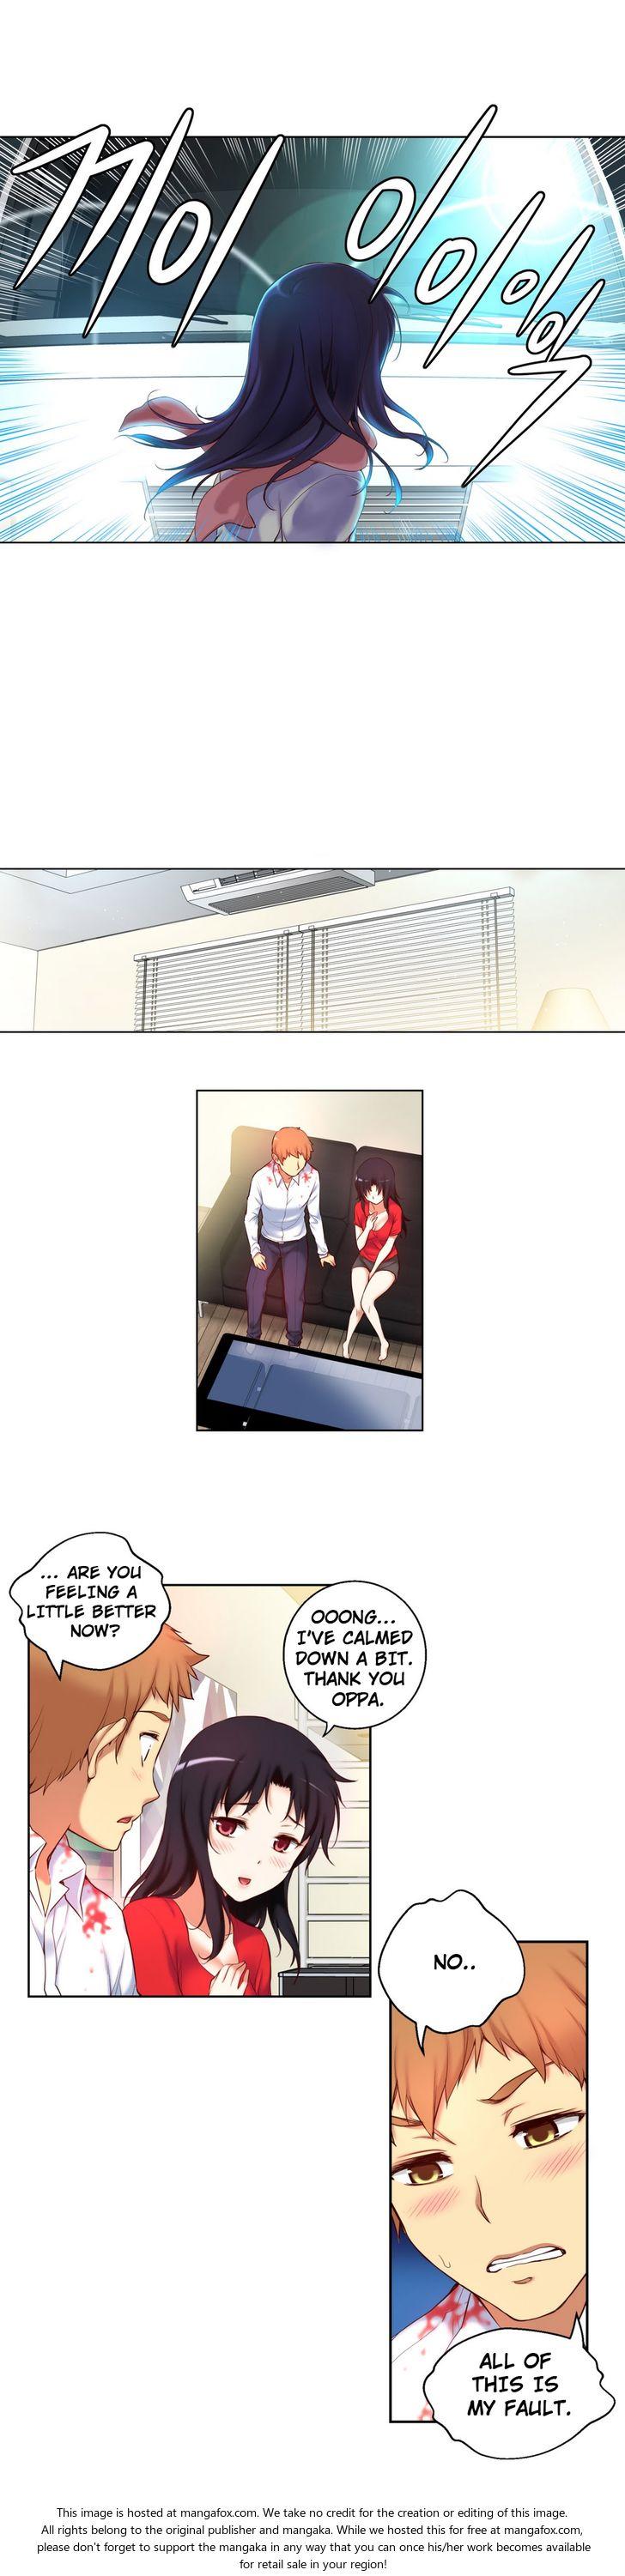 [Donggul Gom] She is Young (English) Part 1/2 753